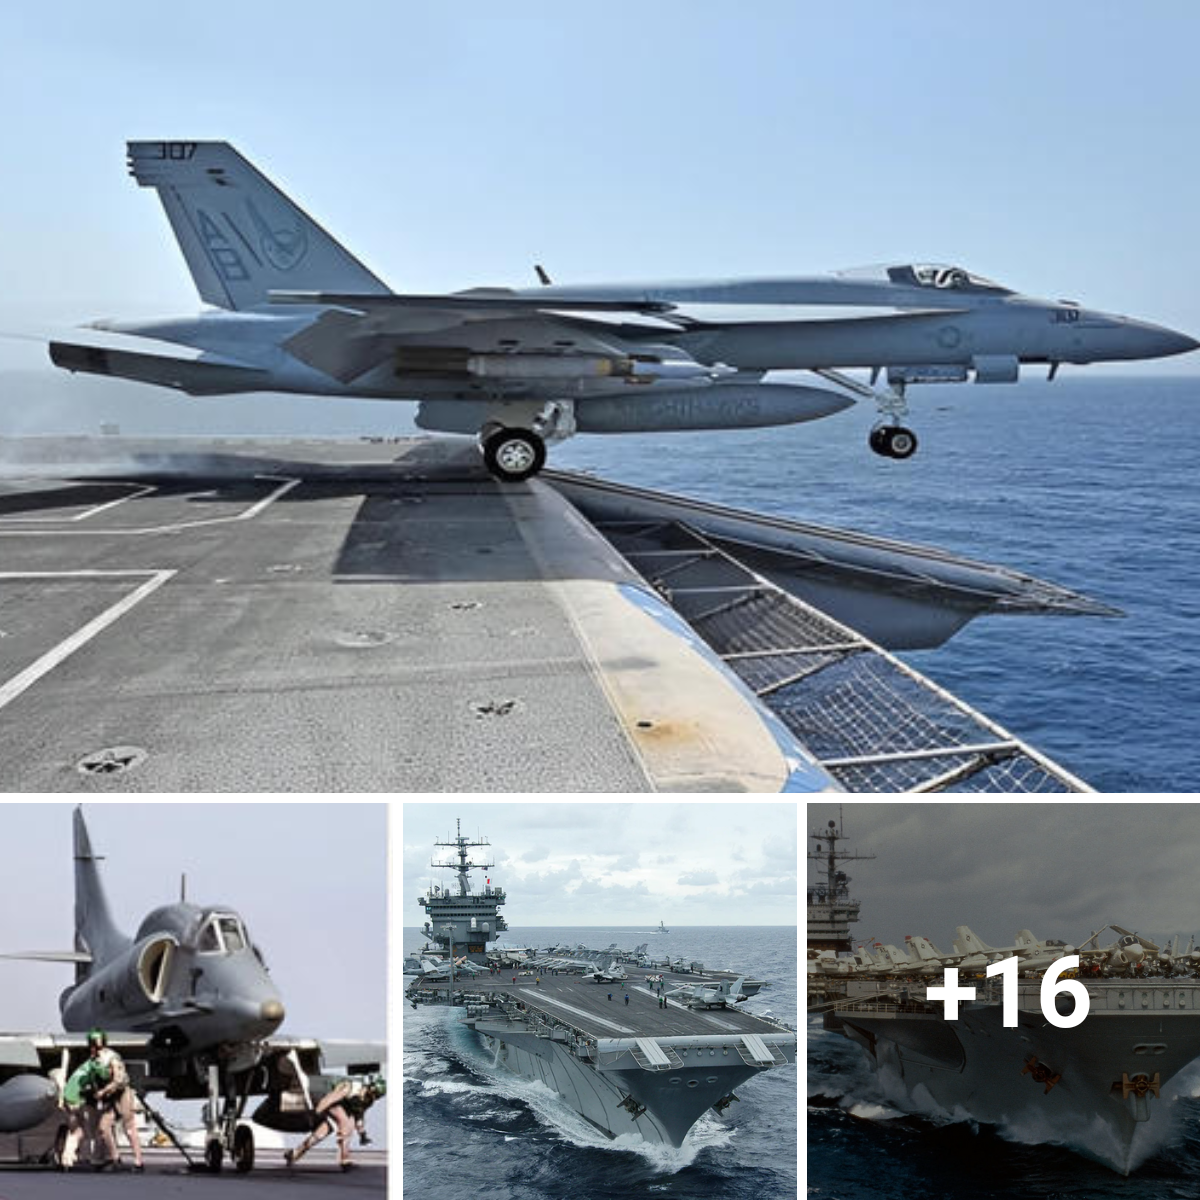 Vanishing Act: Explaining the ‘Bow Prongs’ on Aircraft Carriers’ Disappearance